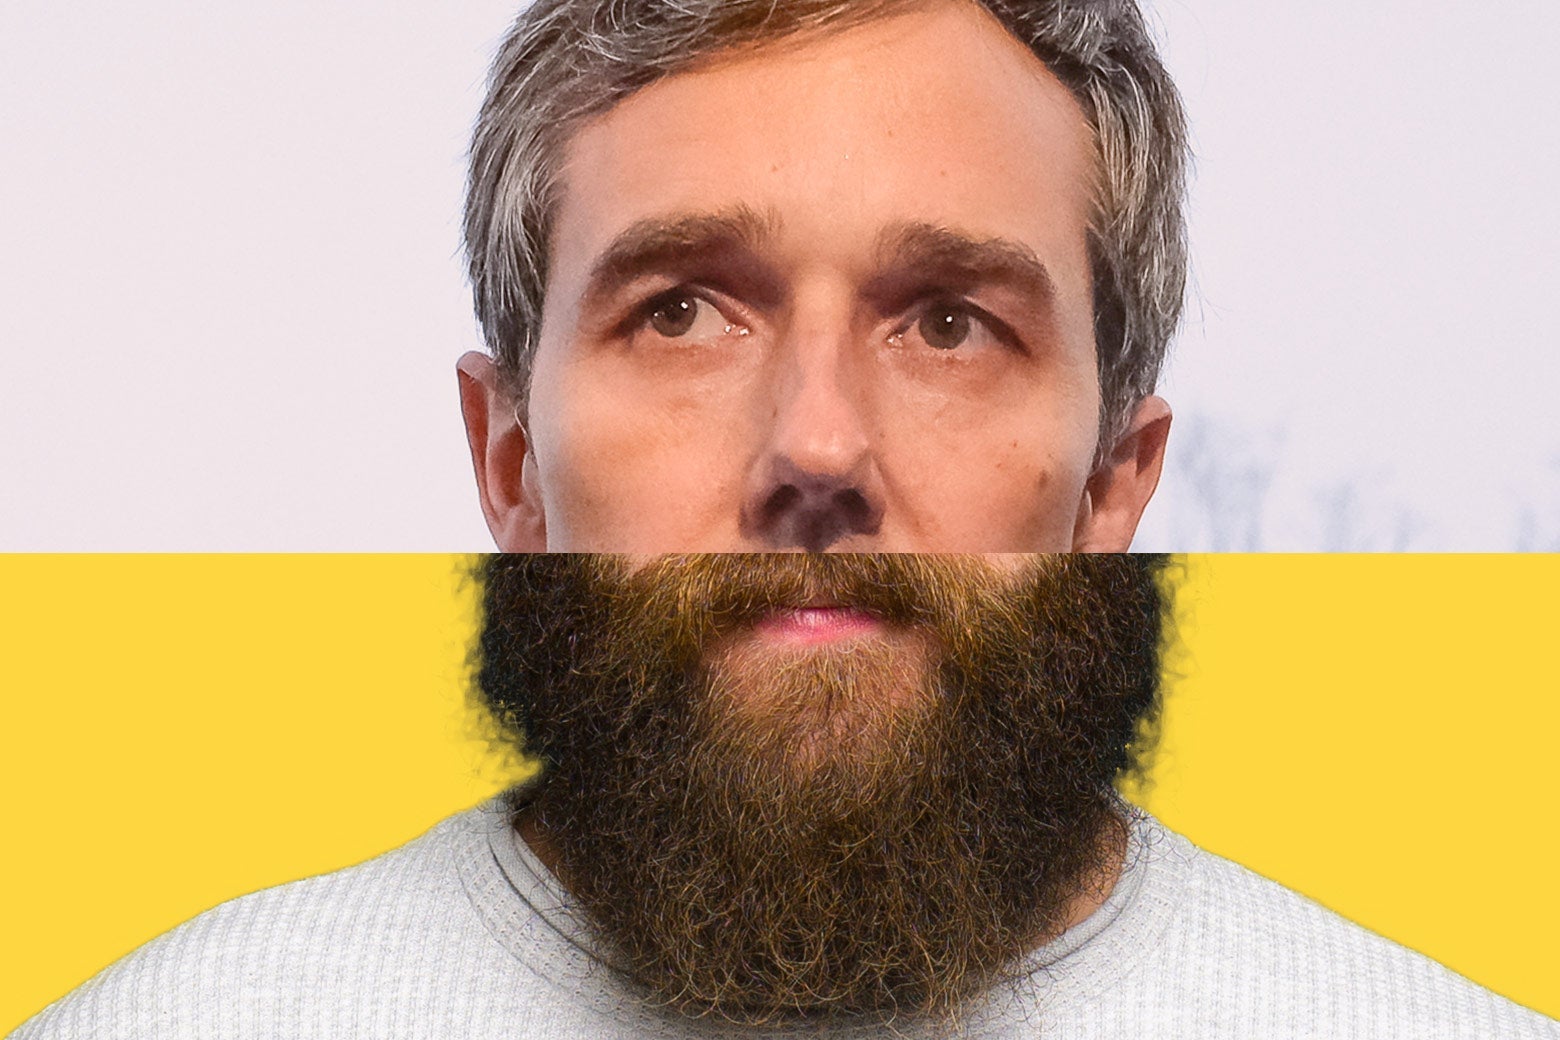 The top of Beto's face and the bottom of another man's bearded face, spliced together.